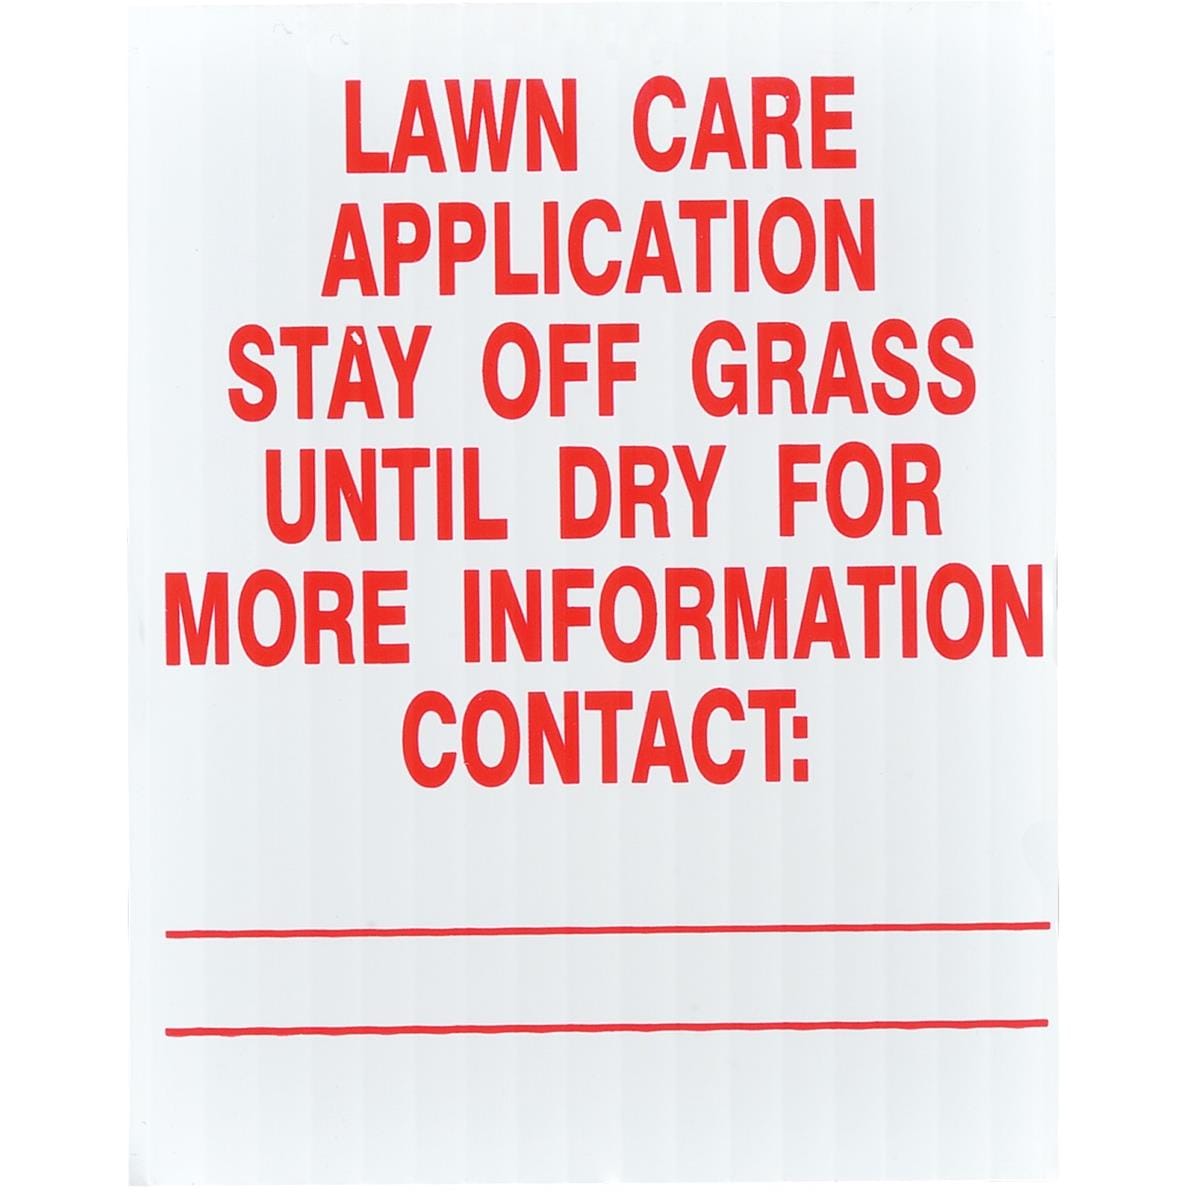 GEMPLER'S Illinois Lawn Pesticide Application Signs